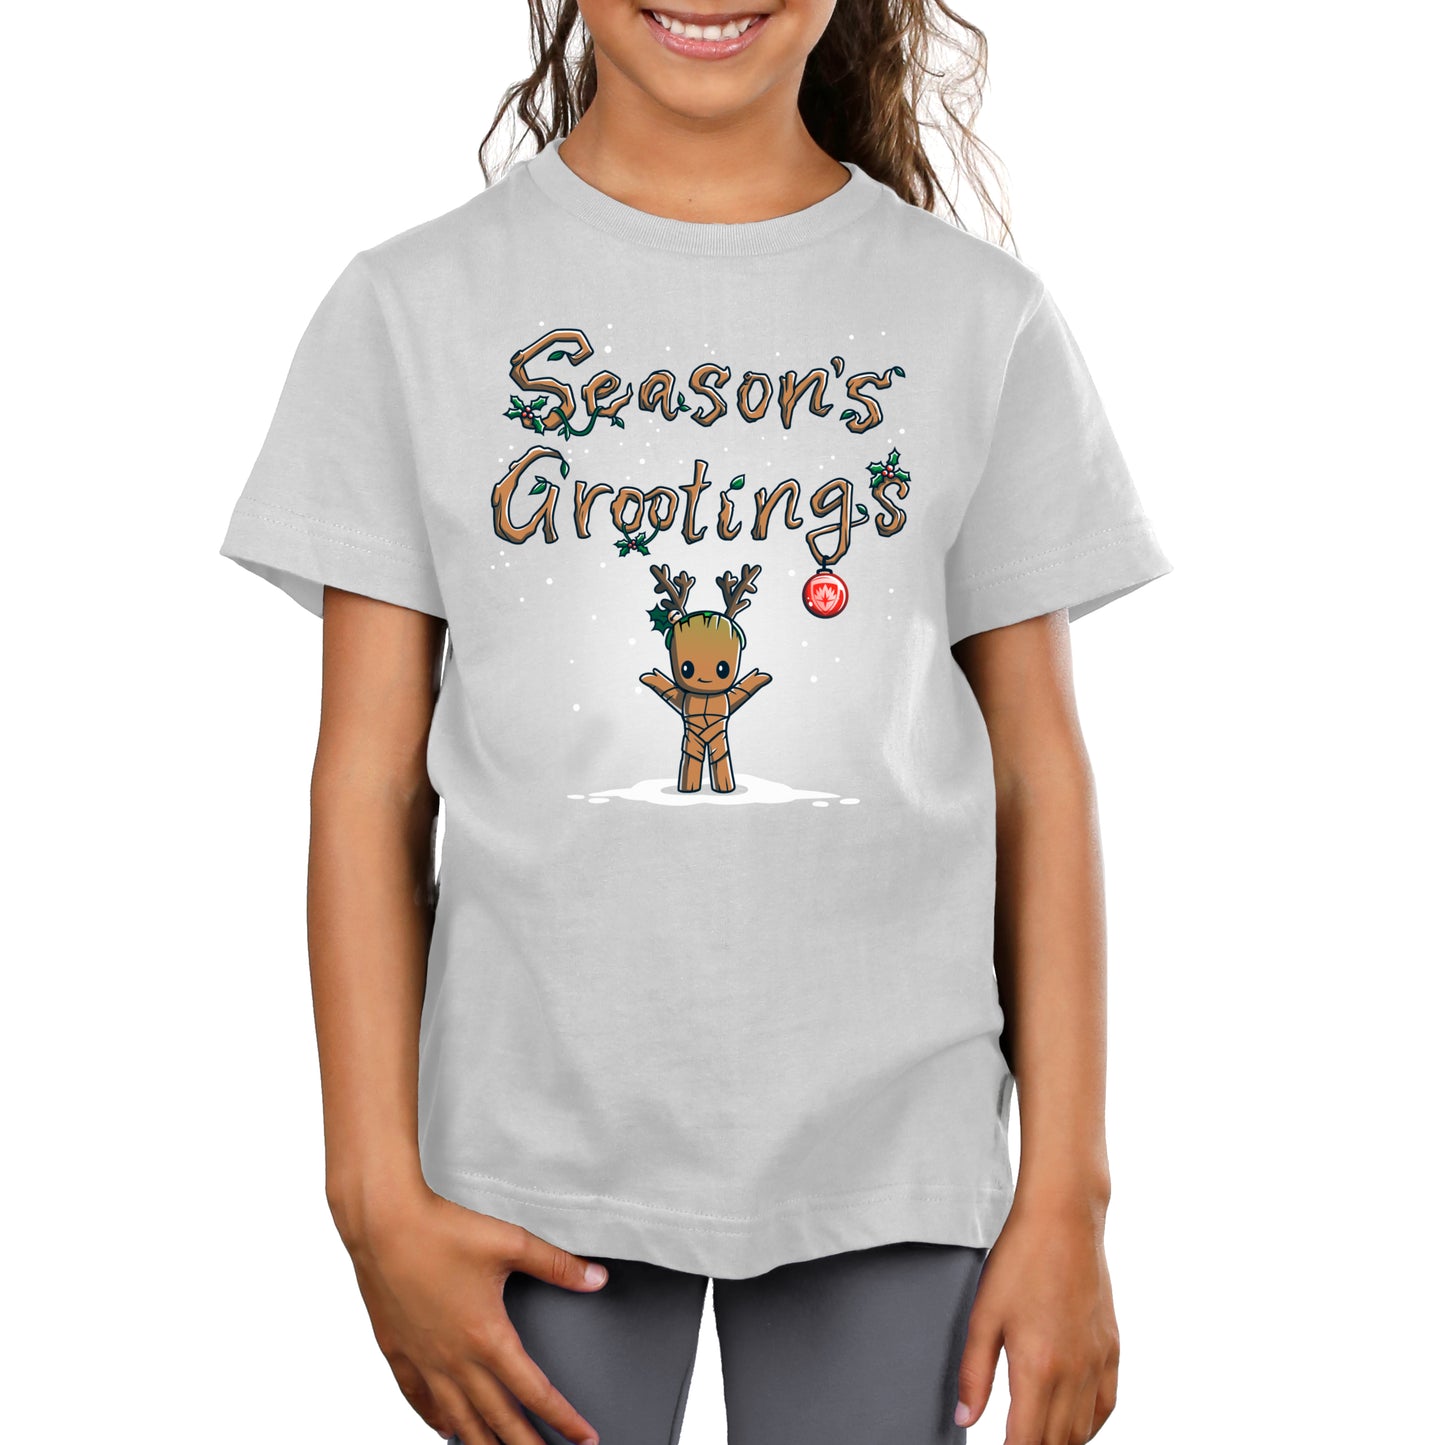 A girl wearing a t-shirt that says Marvel's Season's Grootings during the holidays.